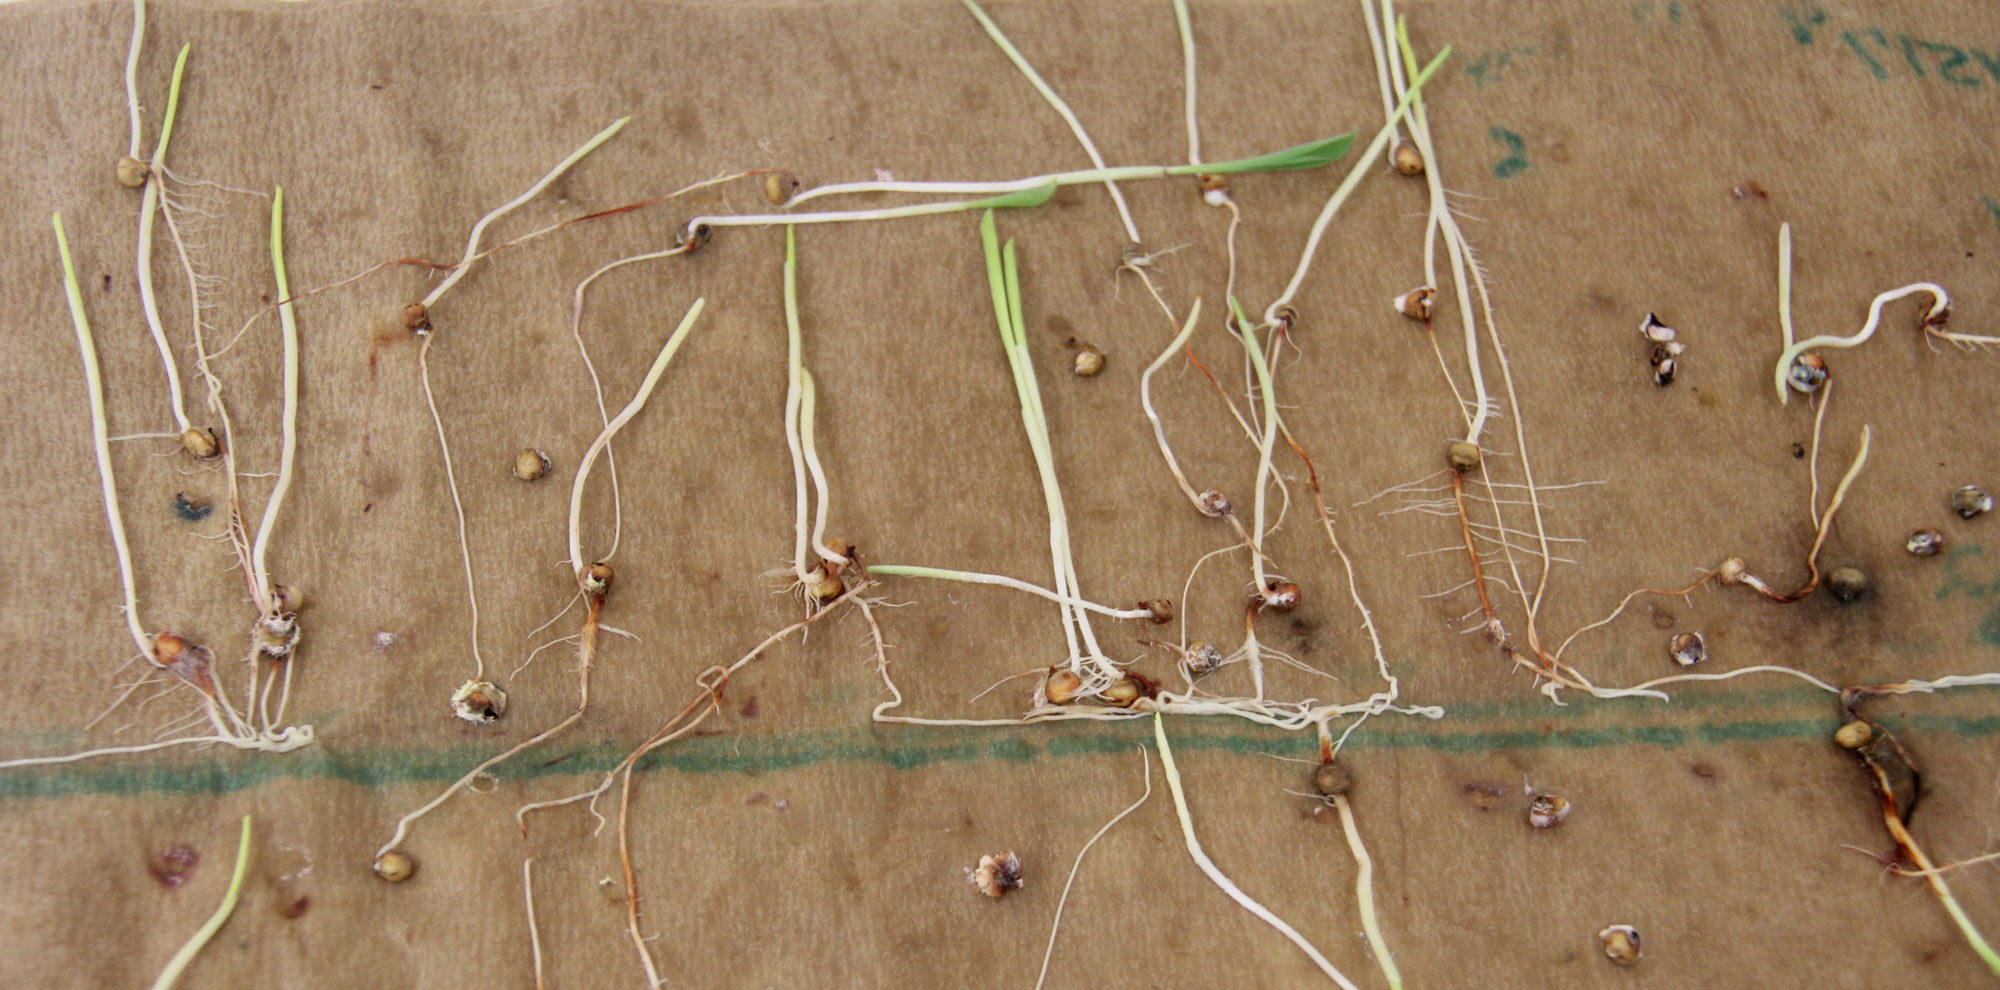 Photograph of germinated sorghum seeds resting on a wet paper towel. The photo shows multiple sorghum grains with radicles and seminal roots and elongated mesocotyls.